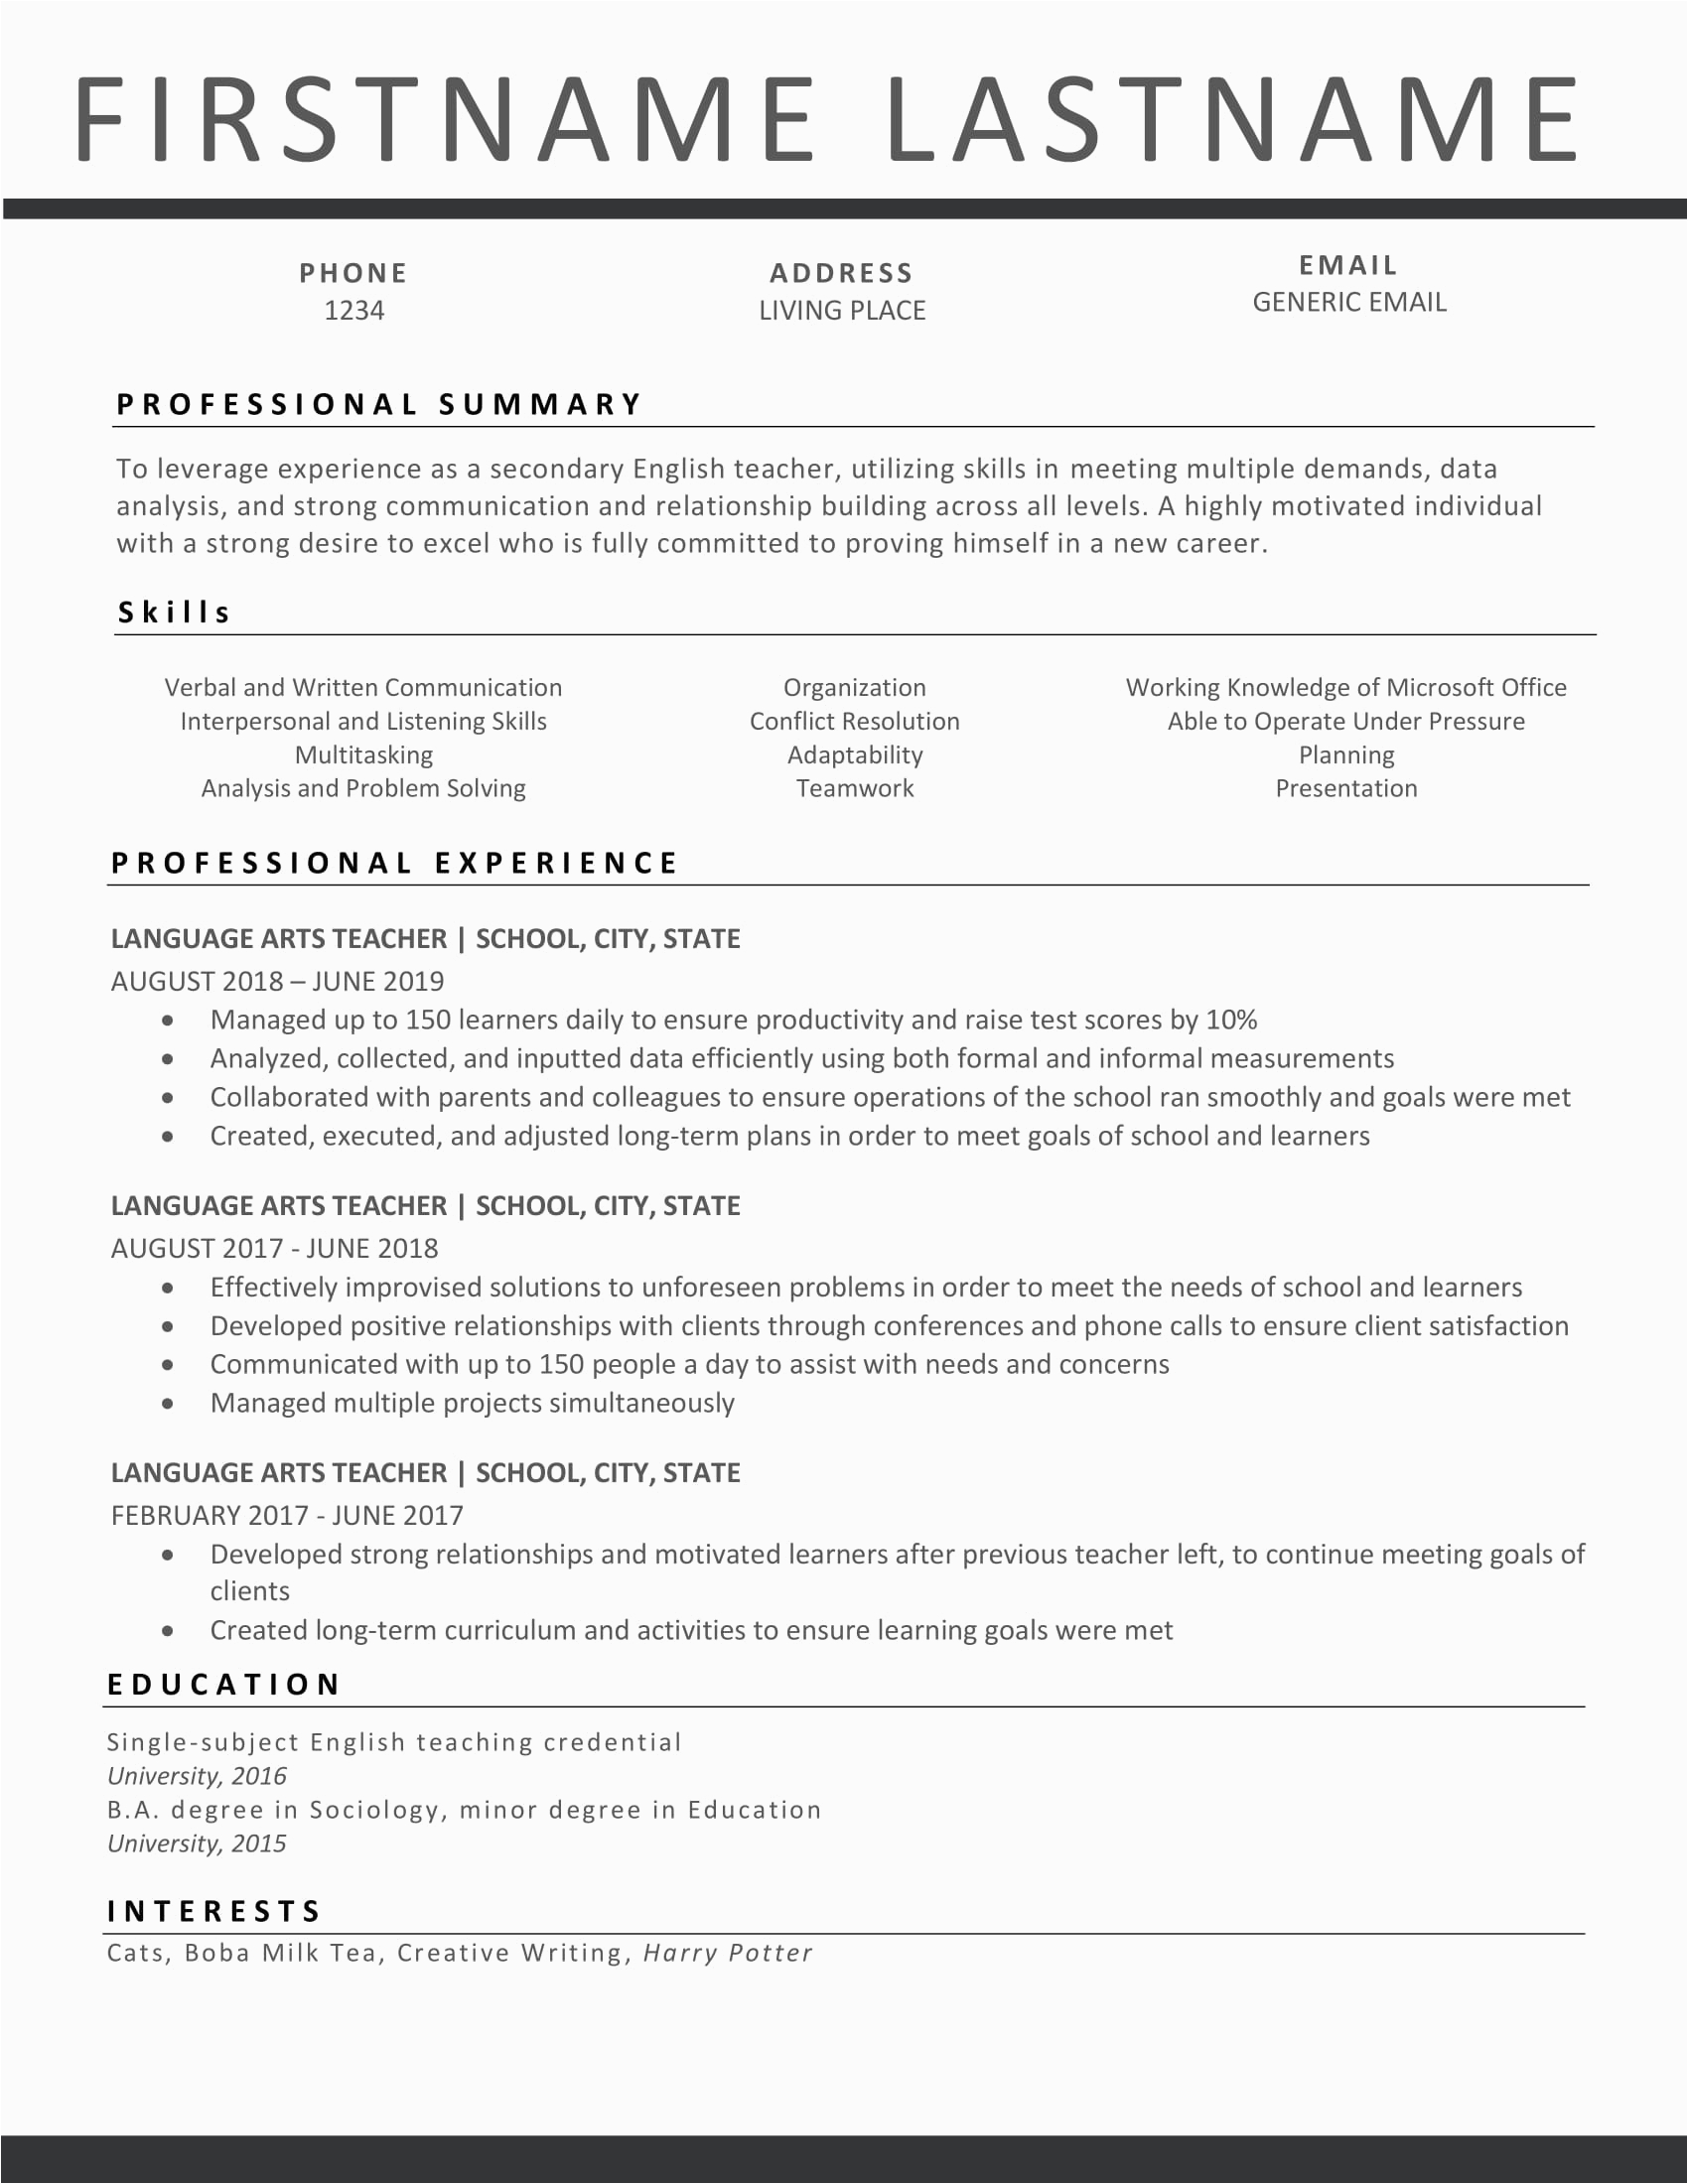 Transition Out Of Teaching Resume Samples Transitioning Out Of Teaching Resume Advice Needed How